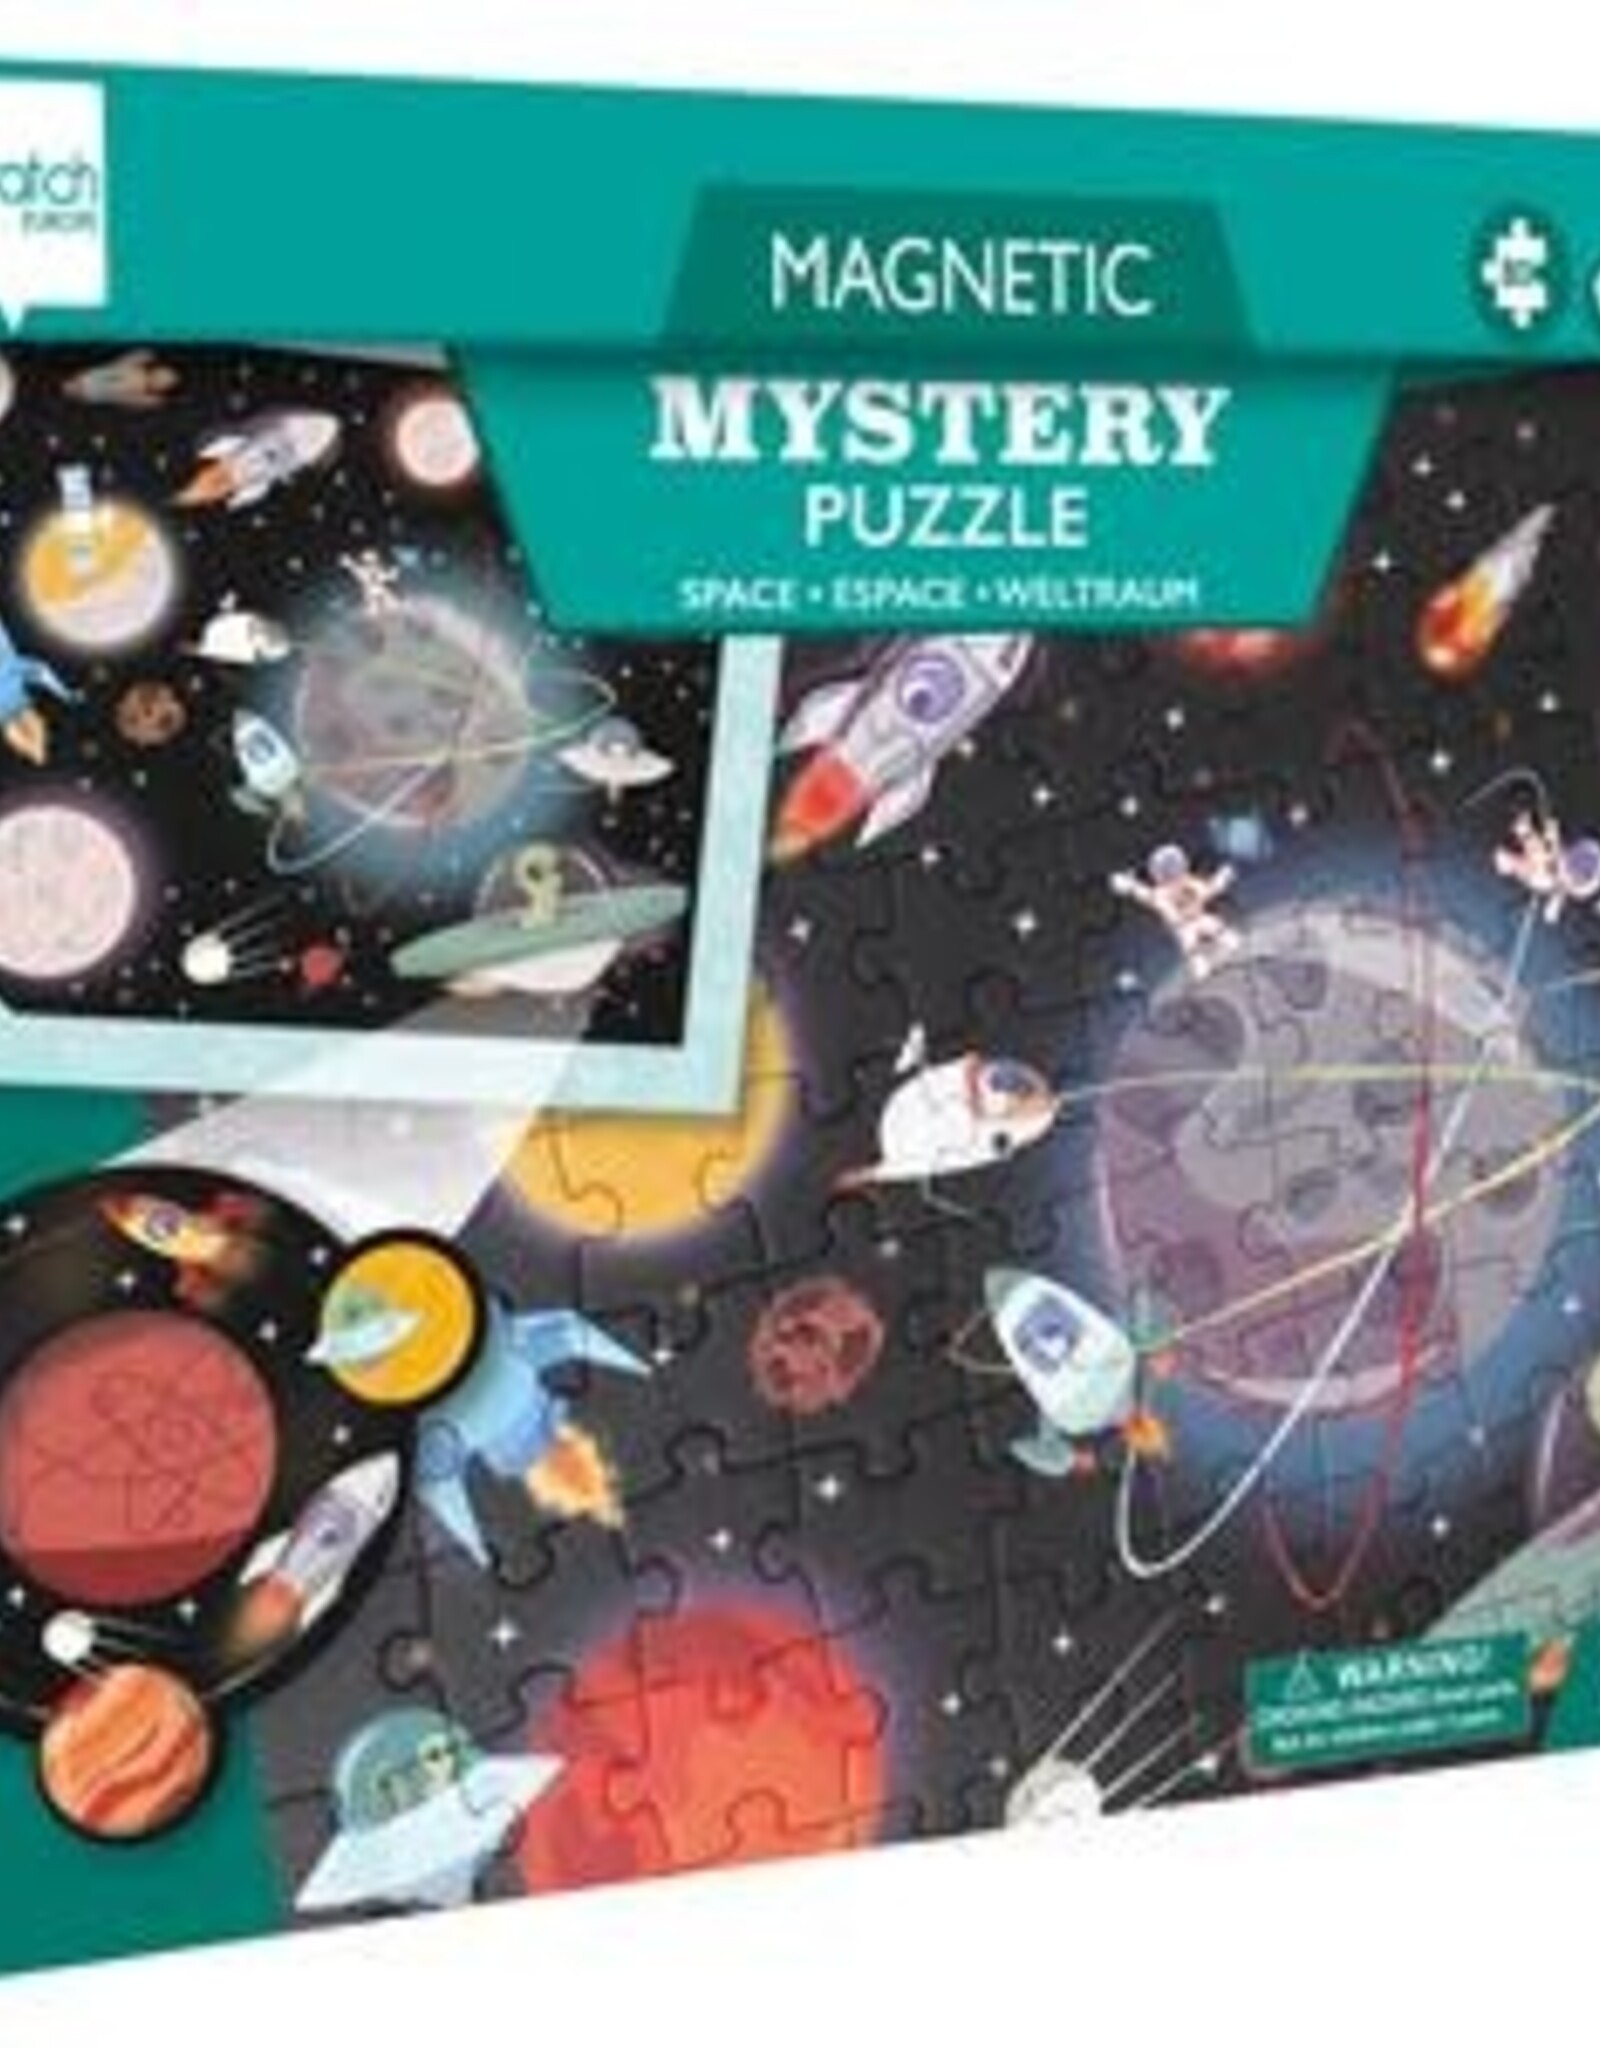 Dam Toys 80pc Magnetic Mystery Puzzle - Space